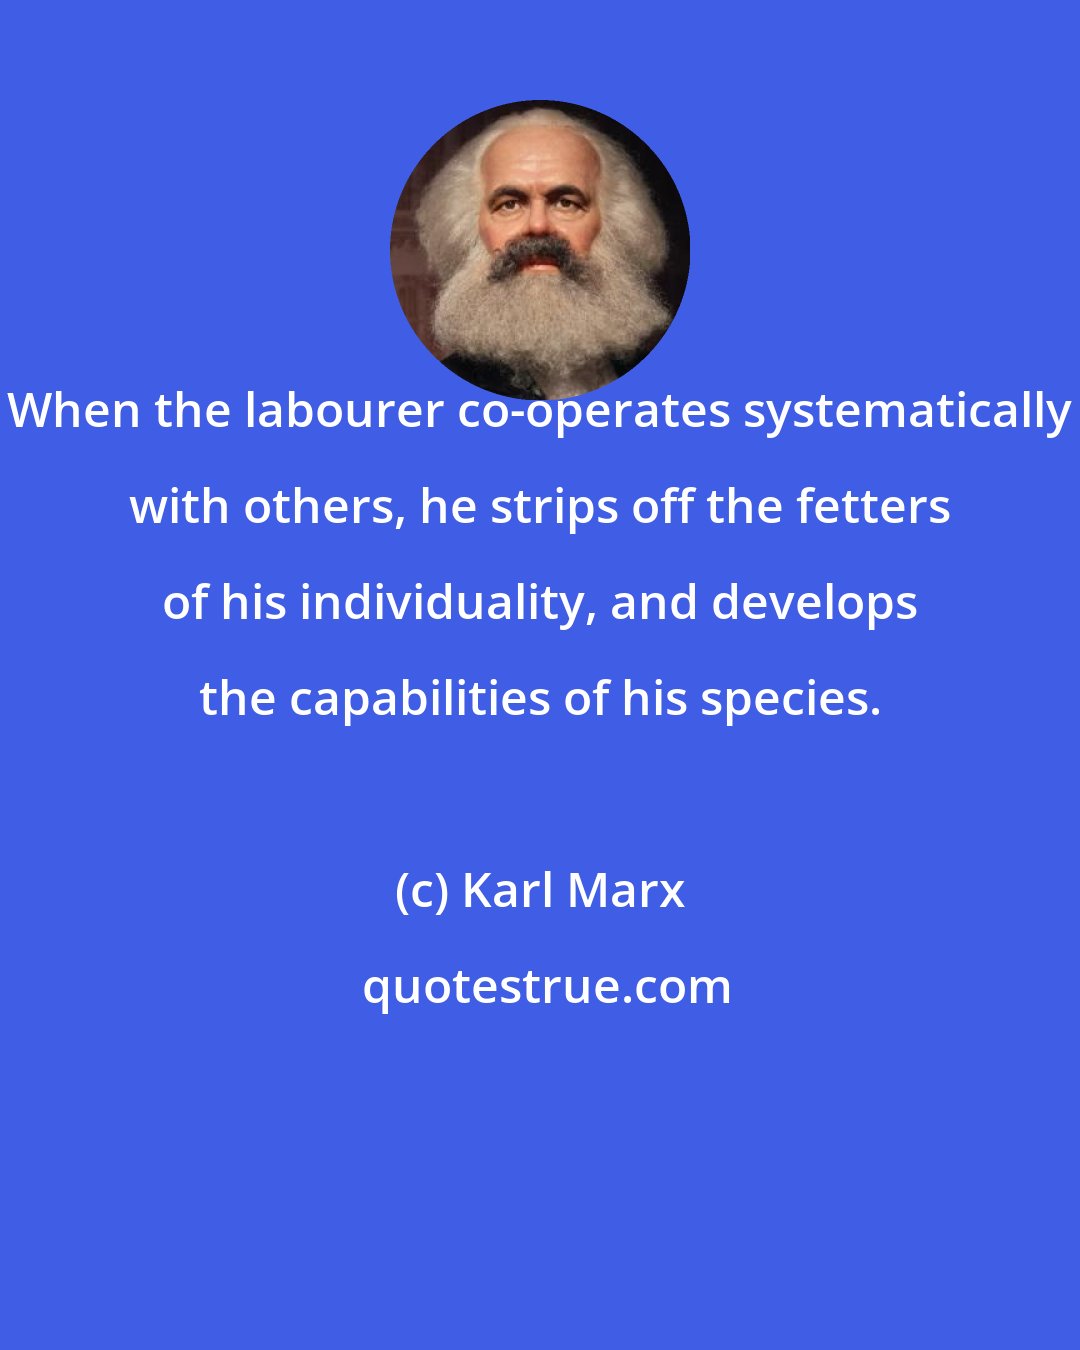 Karl Marx: When the labourer co-operates systematically with others, he strips off the fetters of his individuality, and develops the capabilities of his species.